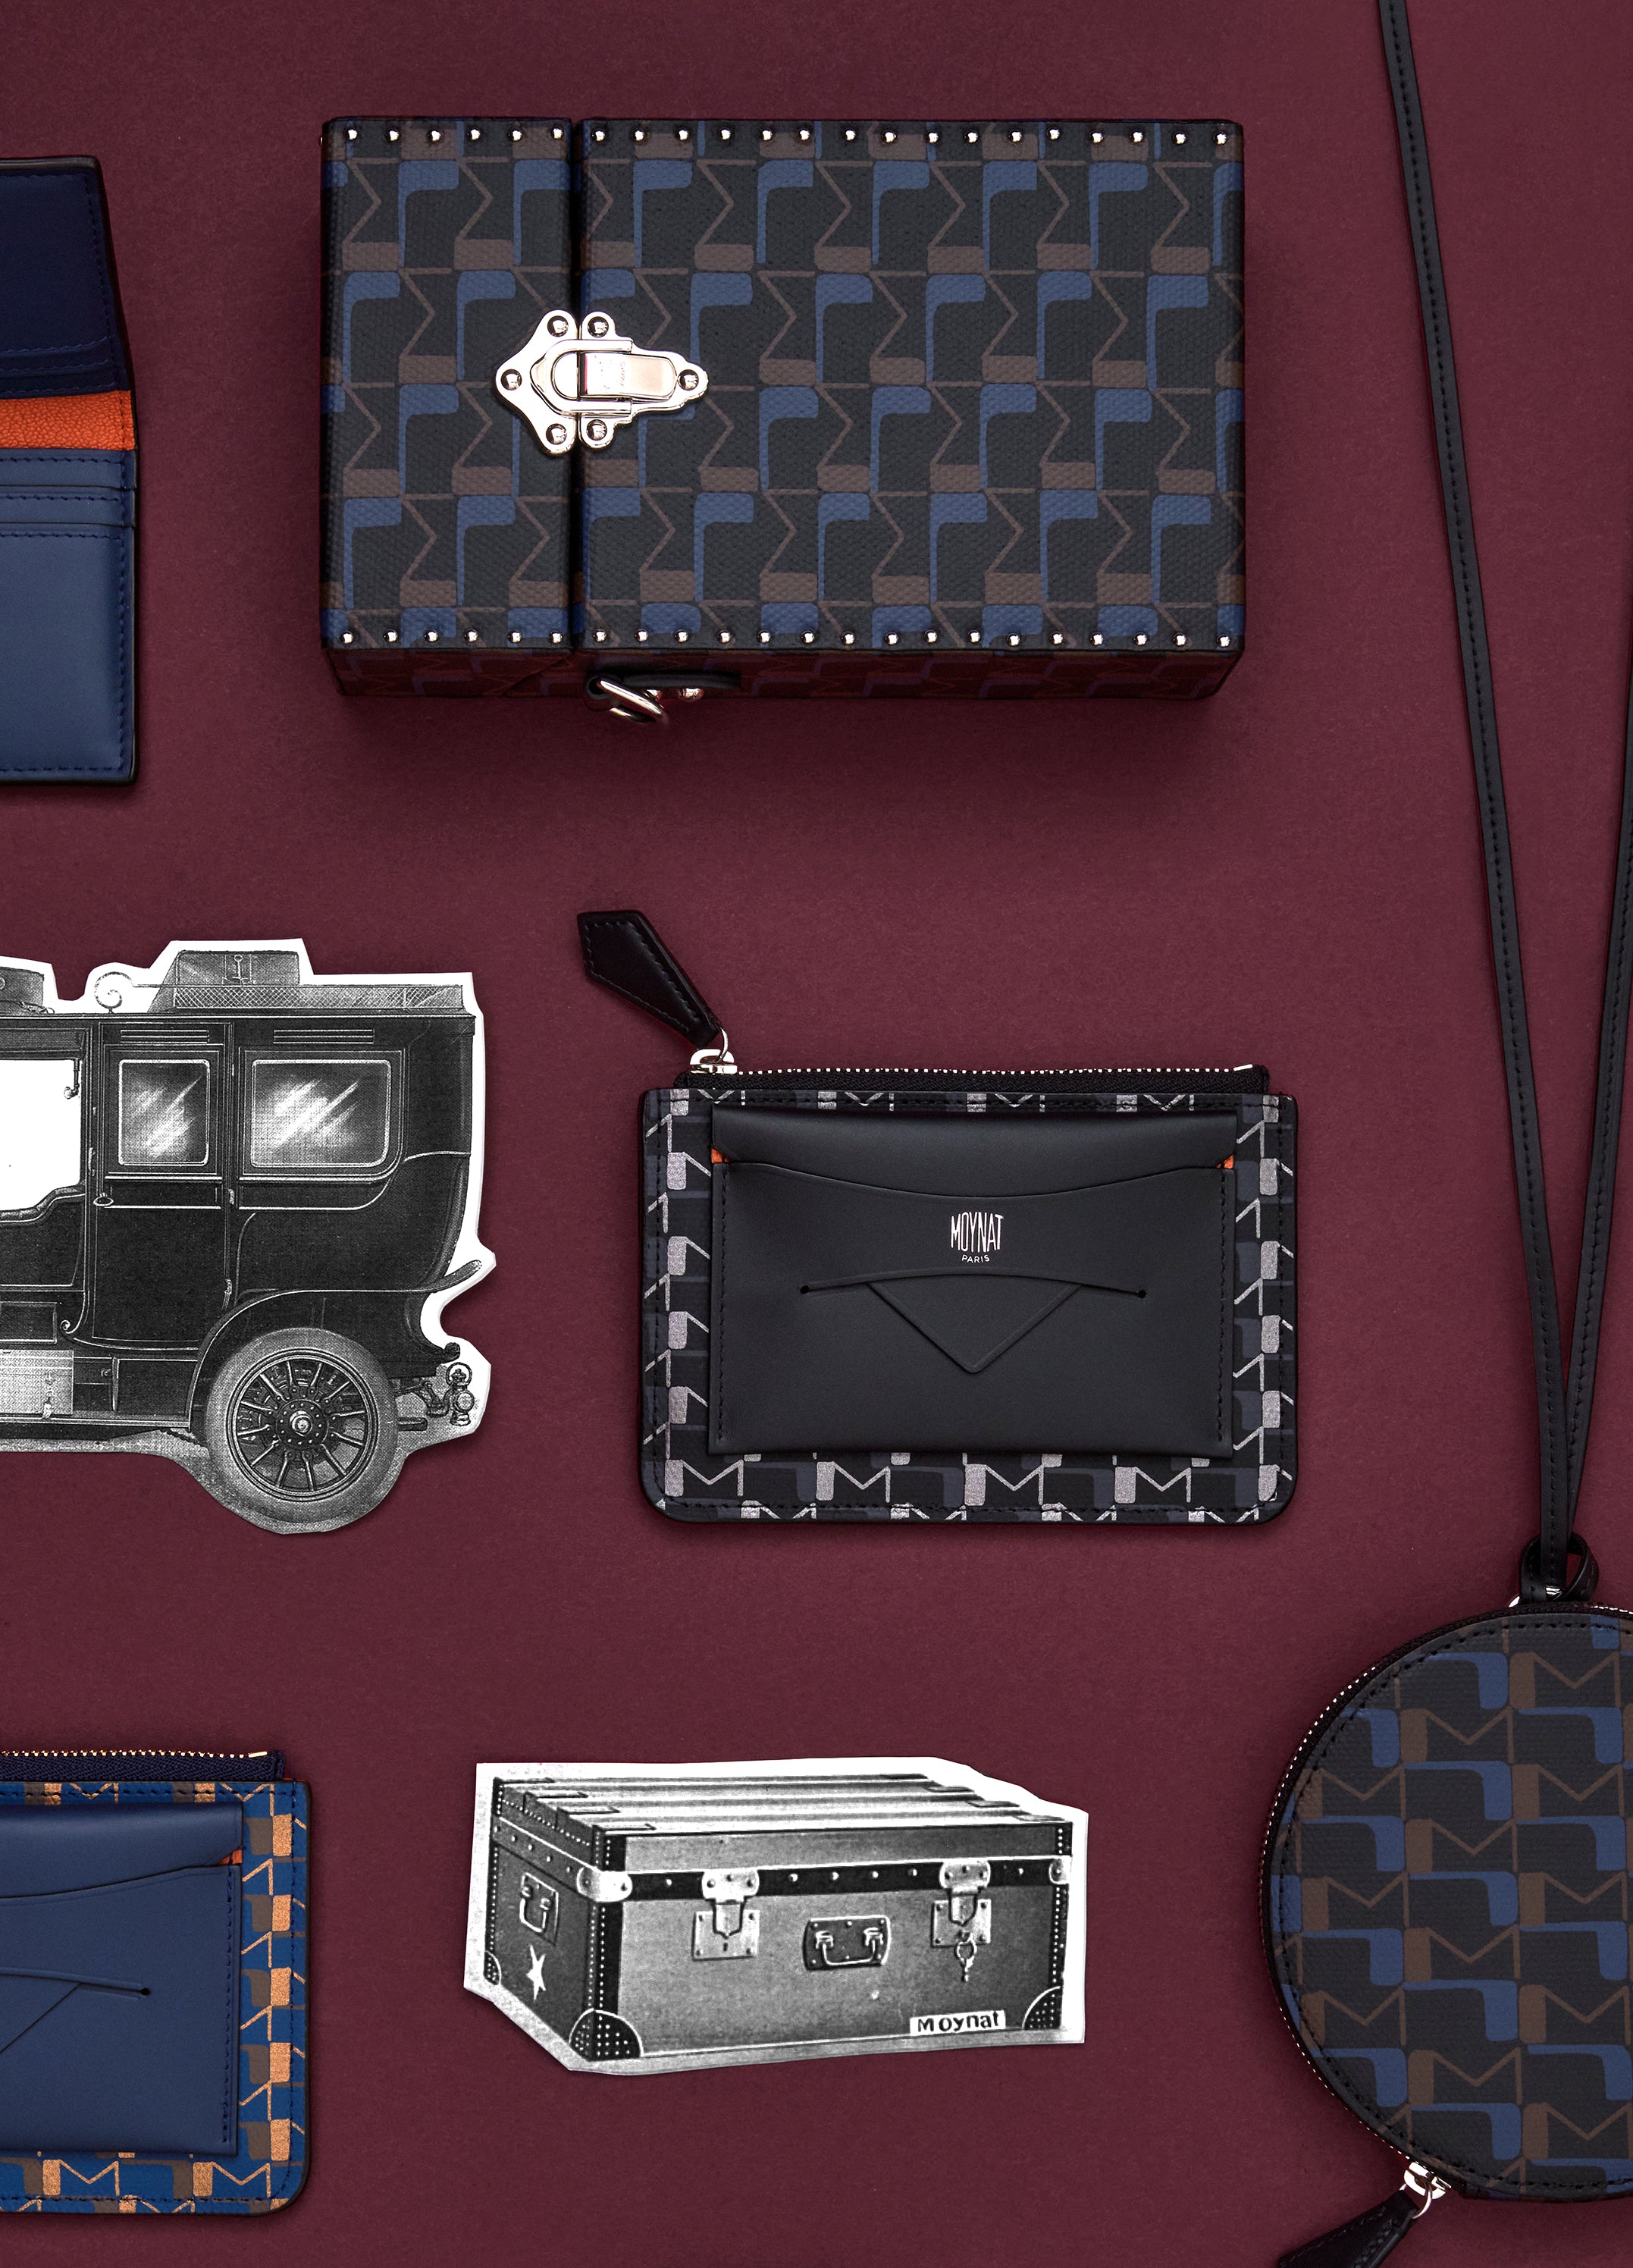 Download Make a statement with the Moynat Taupe Cabotin Wallpaper